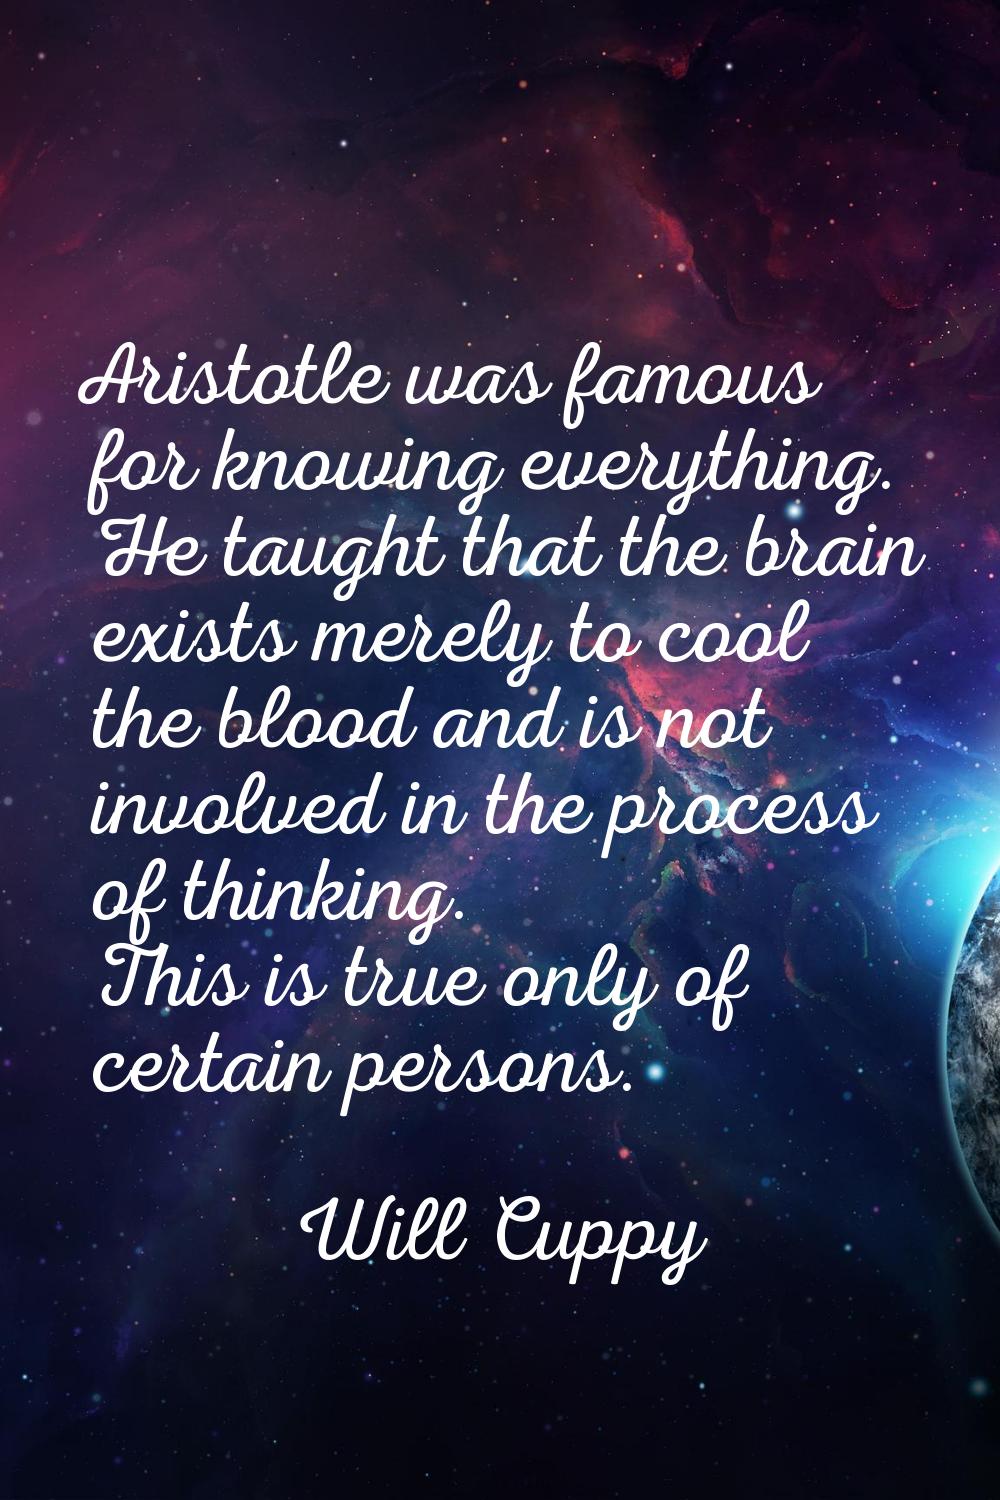 Aristotle was famous for knowing everything. He taught that the brain exists merely to cool the blo